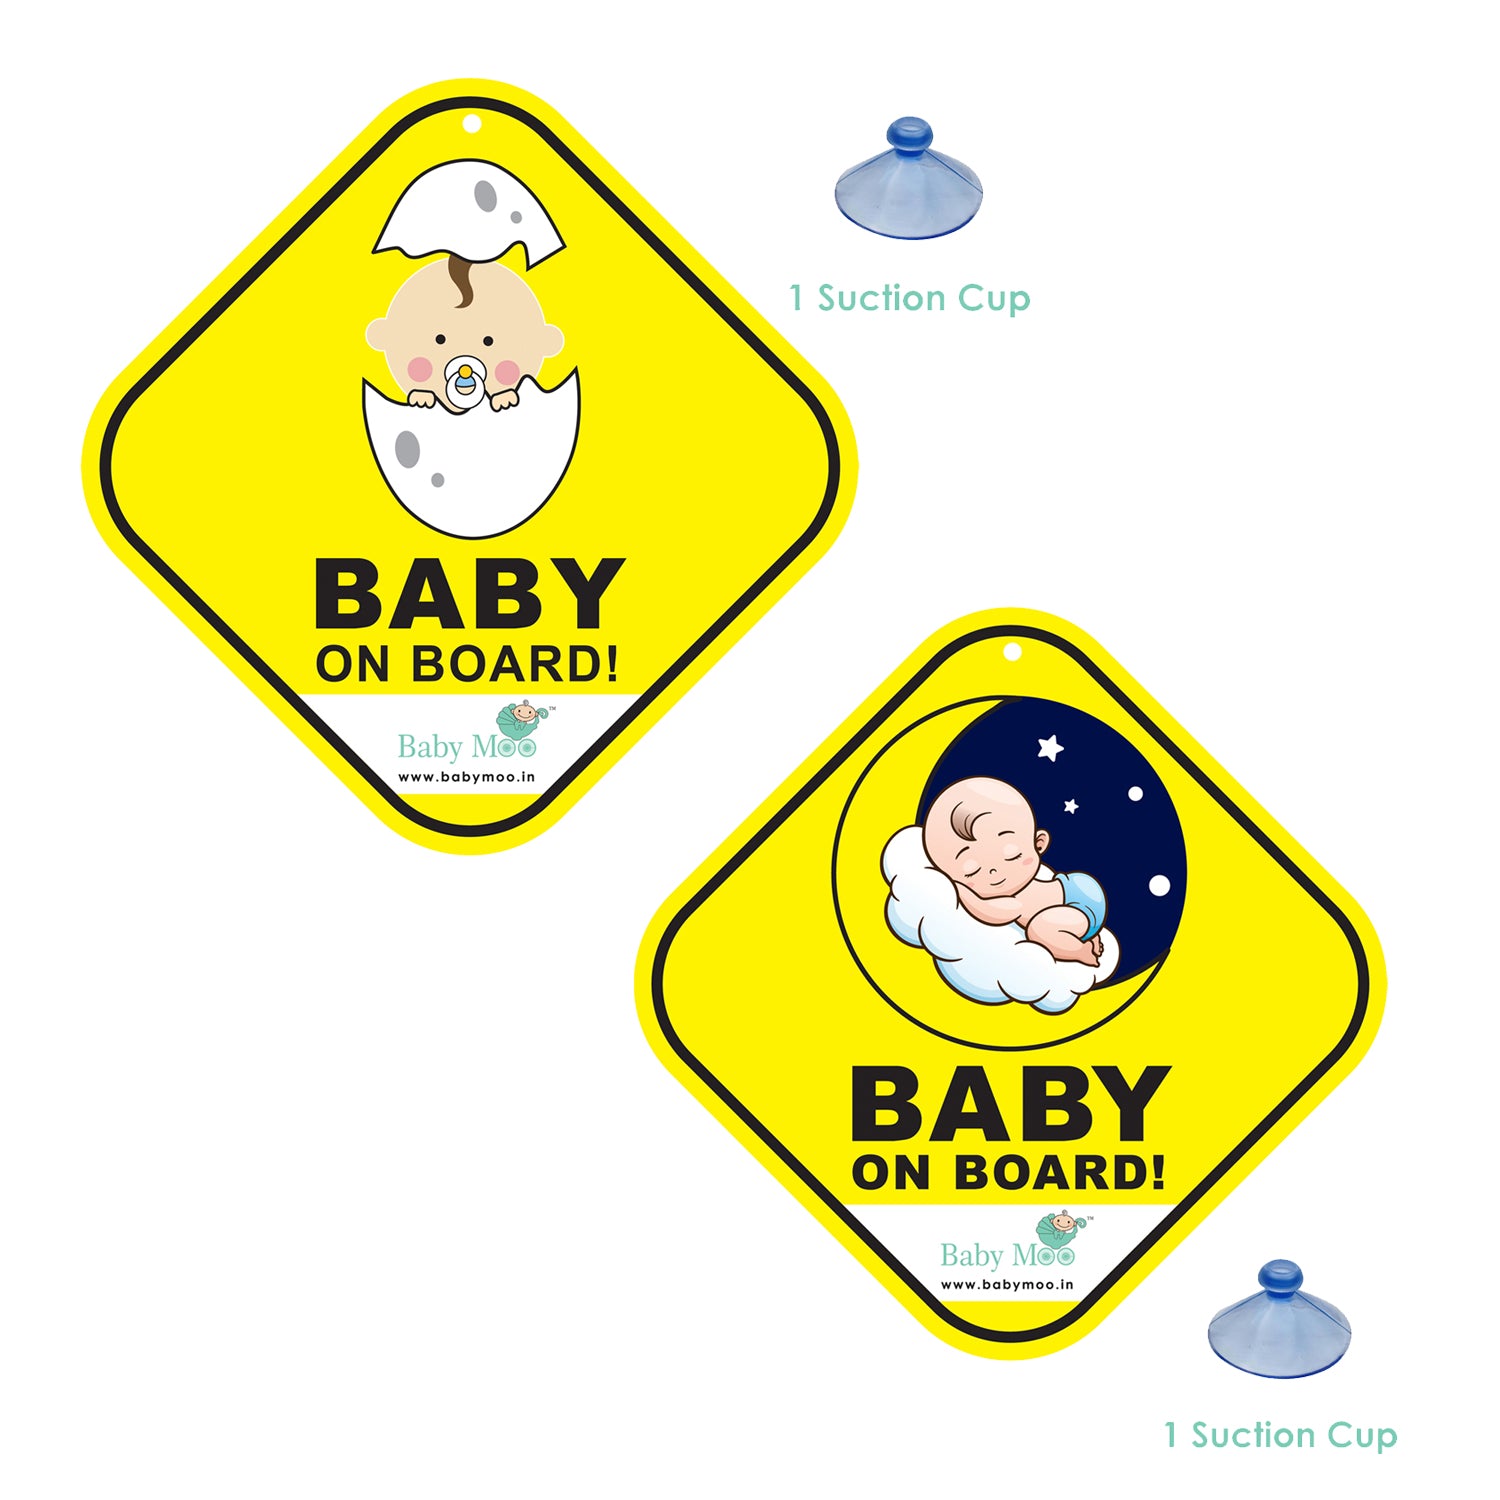 Baby Moo Car Safety Sign Snoozing Angel Baby On Board With Suction Cup Clip 2 Pack - Yellow - Baby Moo